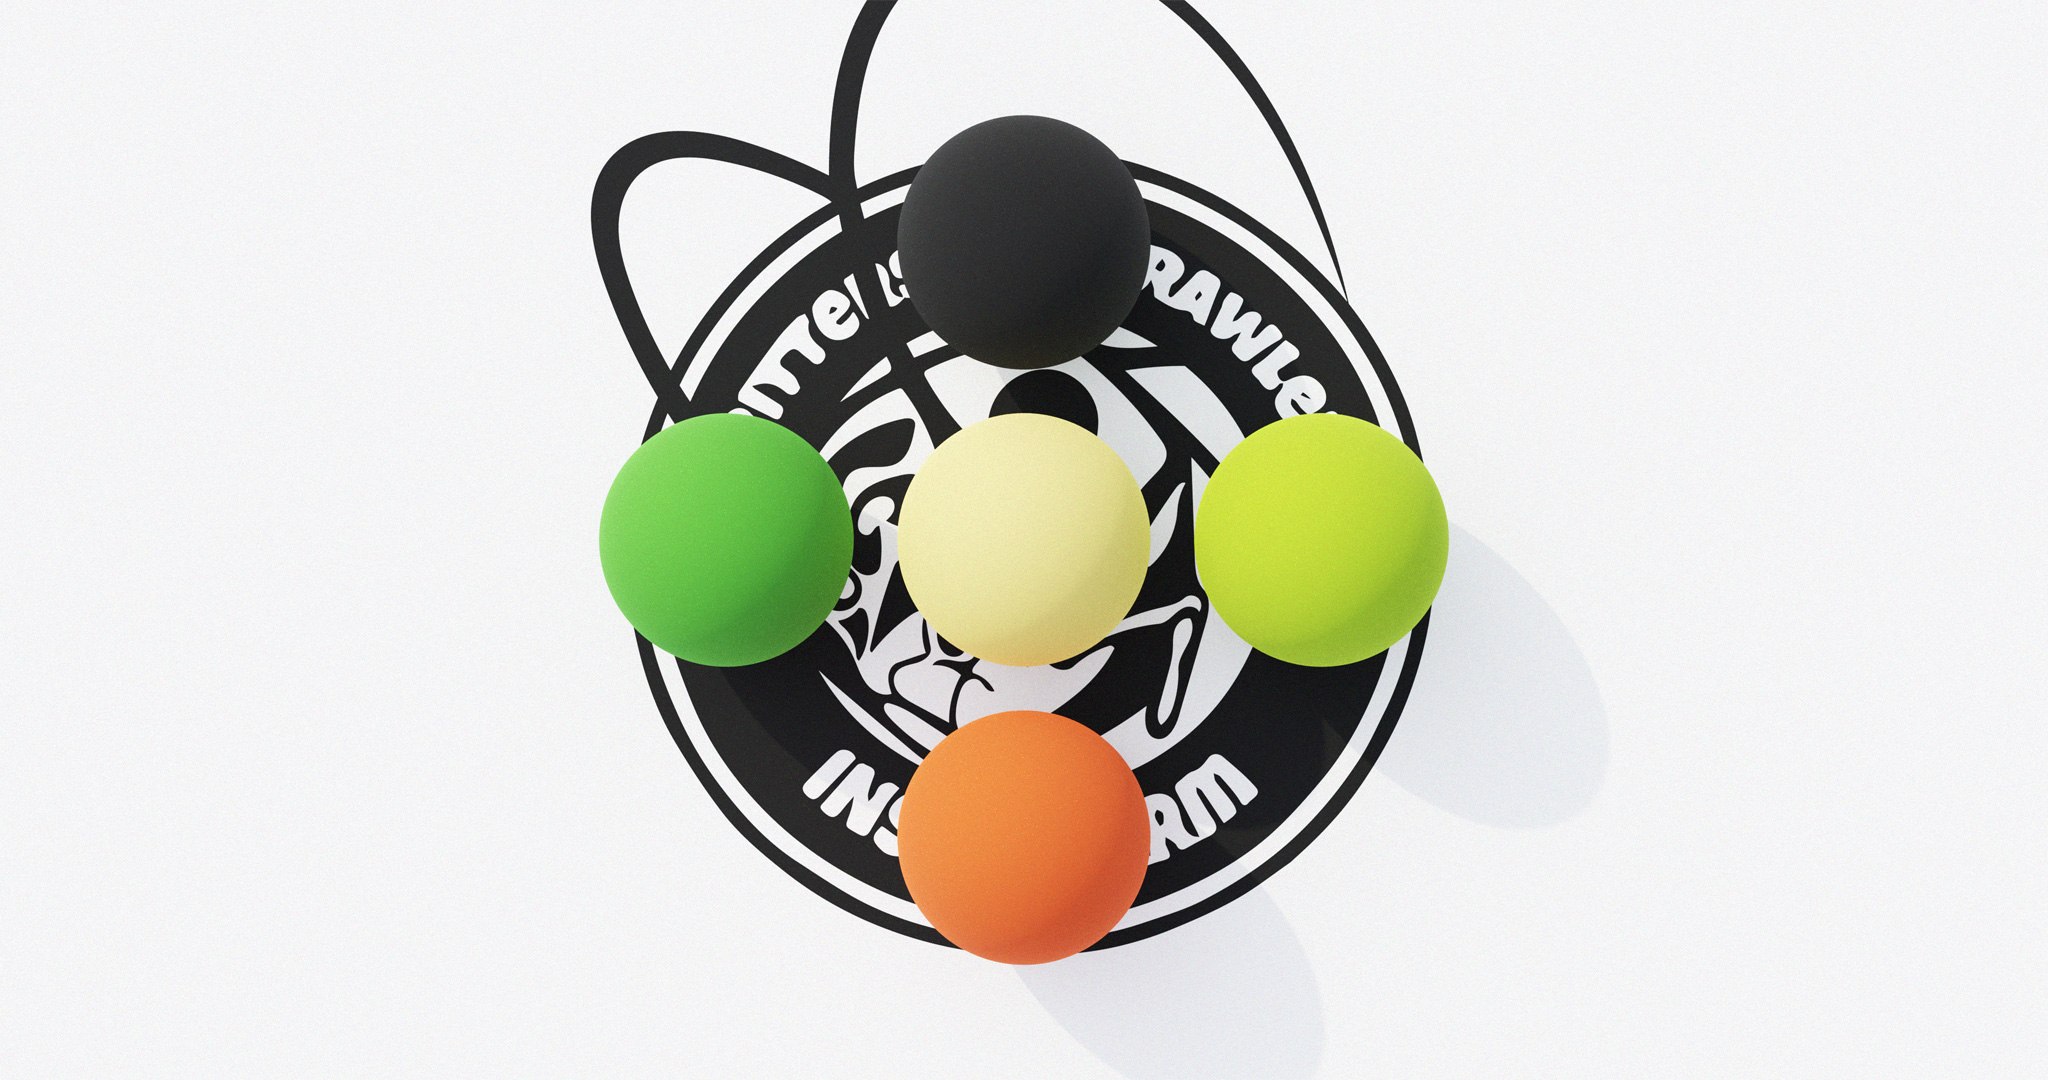 3D render of 5 differently colored ball, each representing a color from the palette, placed on top of the black and white version of the Critters and Crawlers logo.